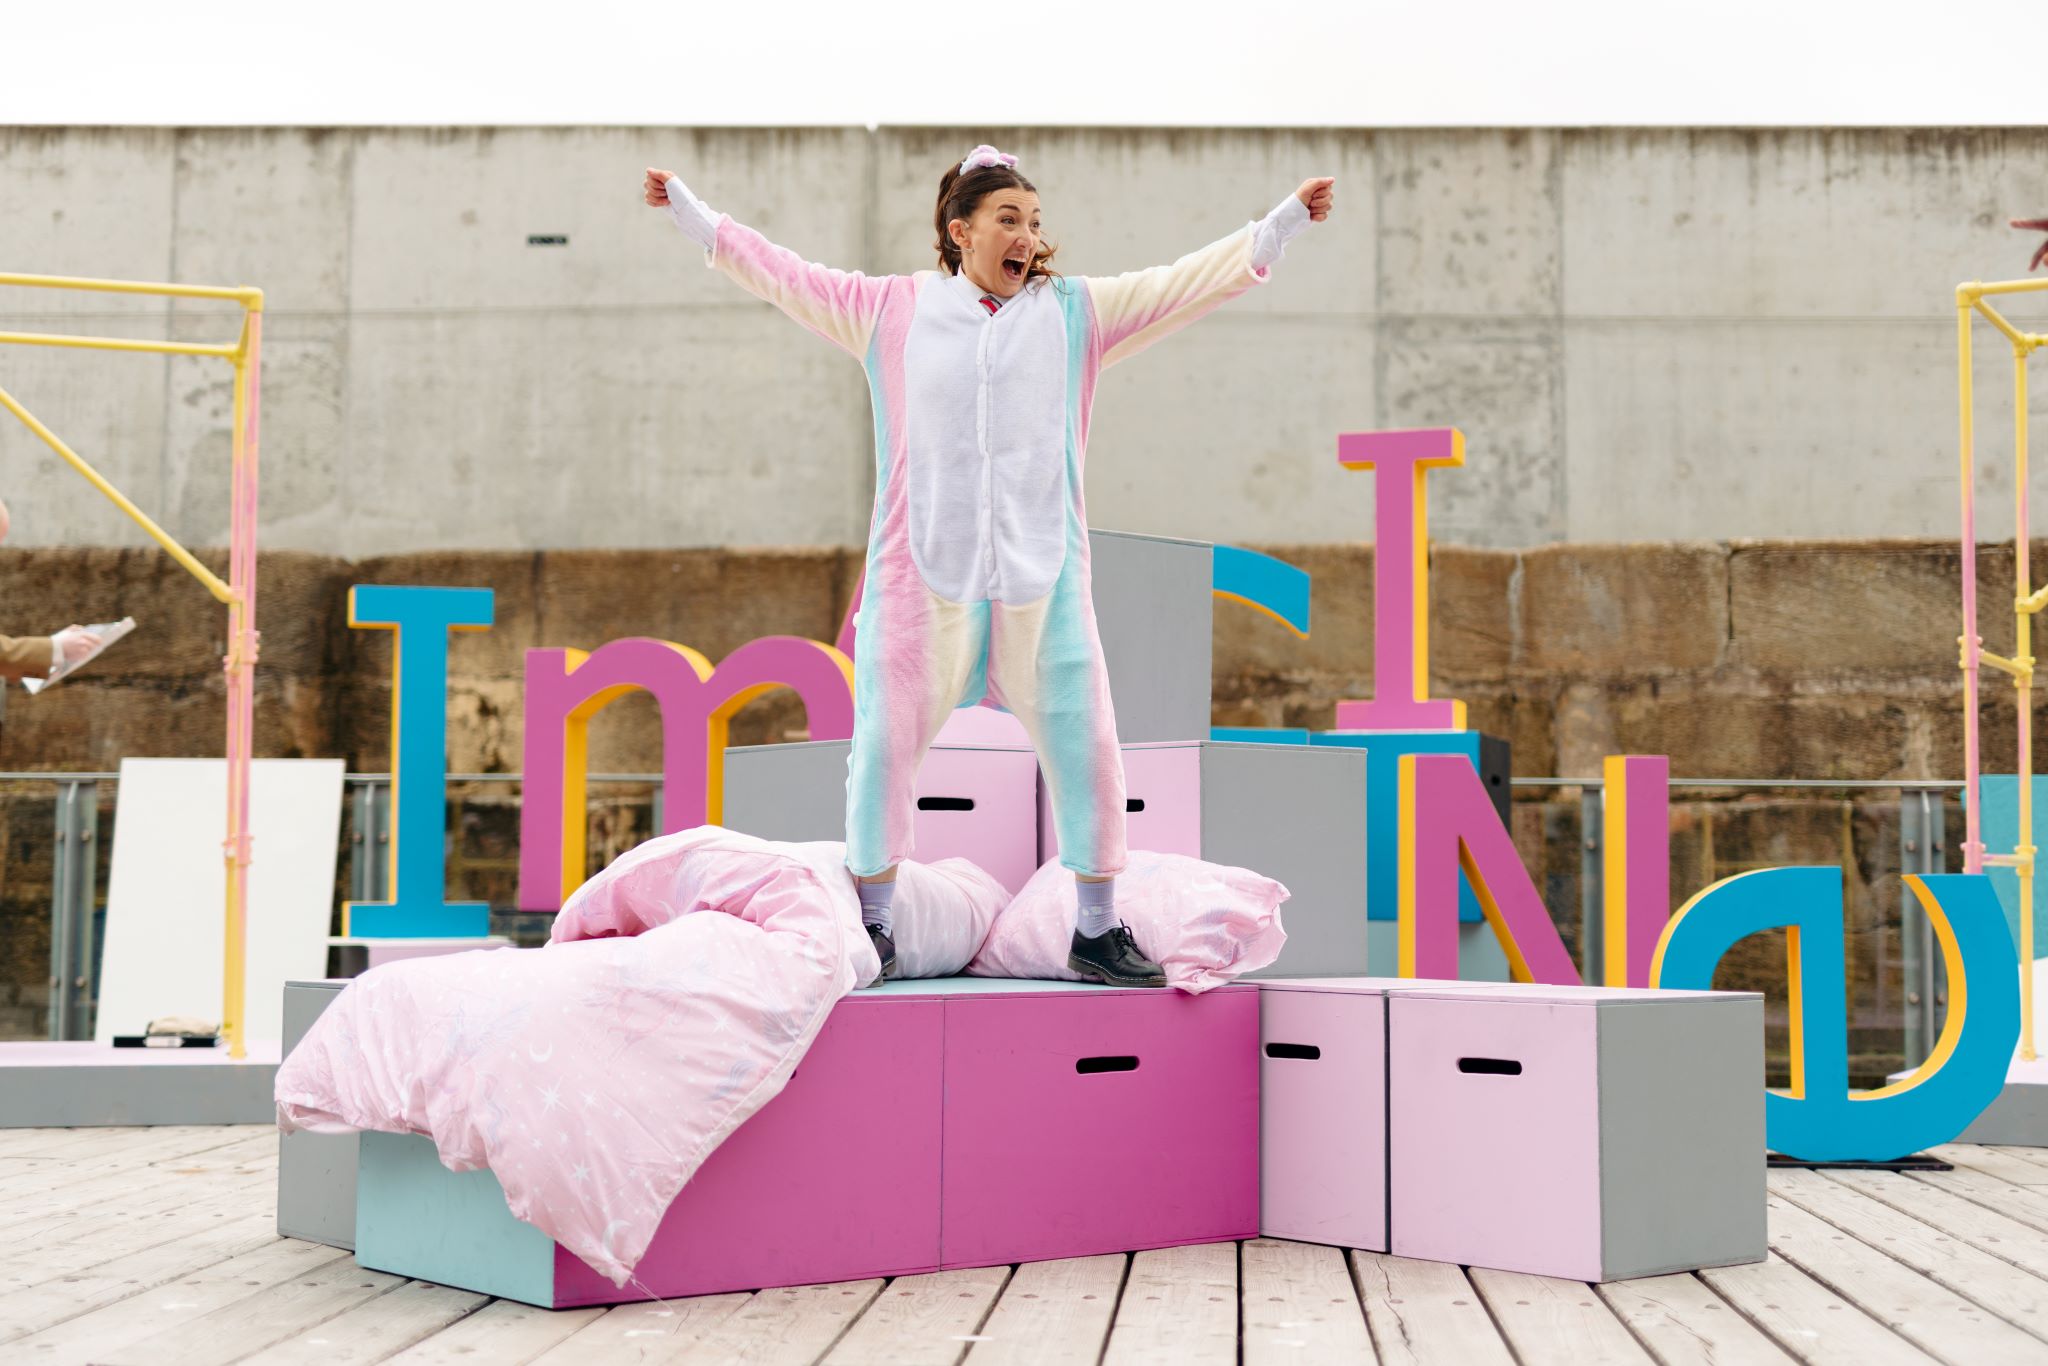 Atop pastel-coloured boxes draped in a pink duvet, a performer in a pastel-coloured onesie sings with her arms raised up.